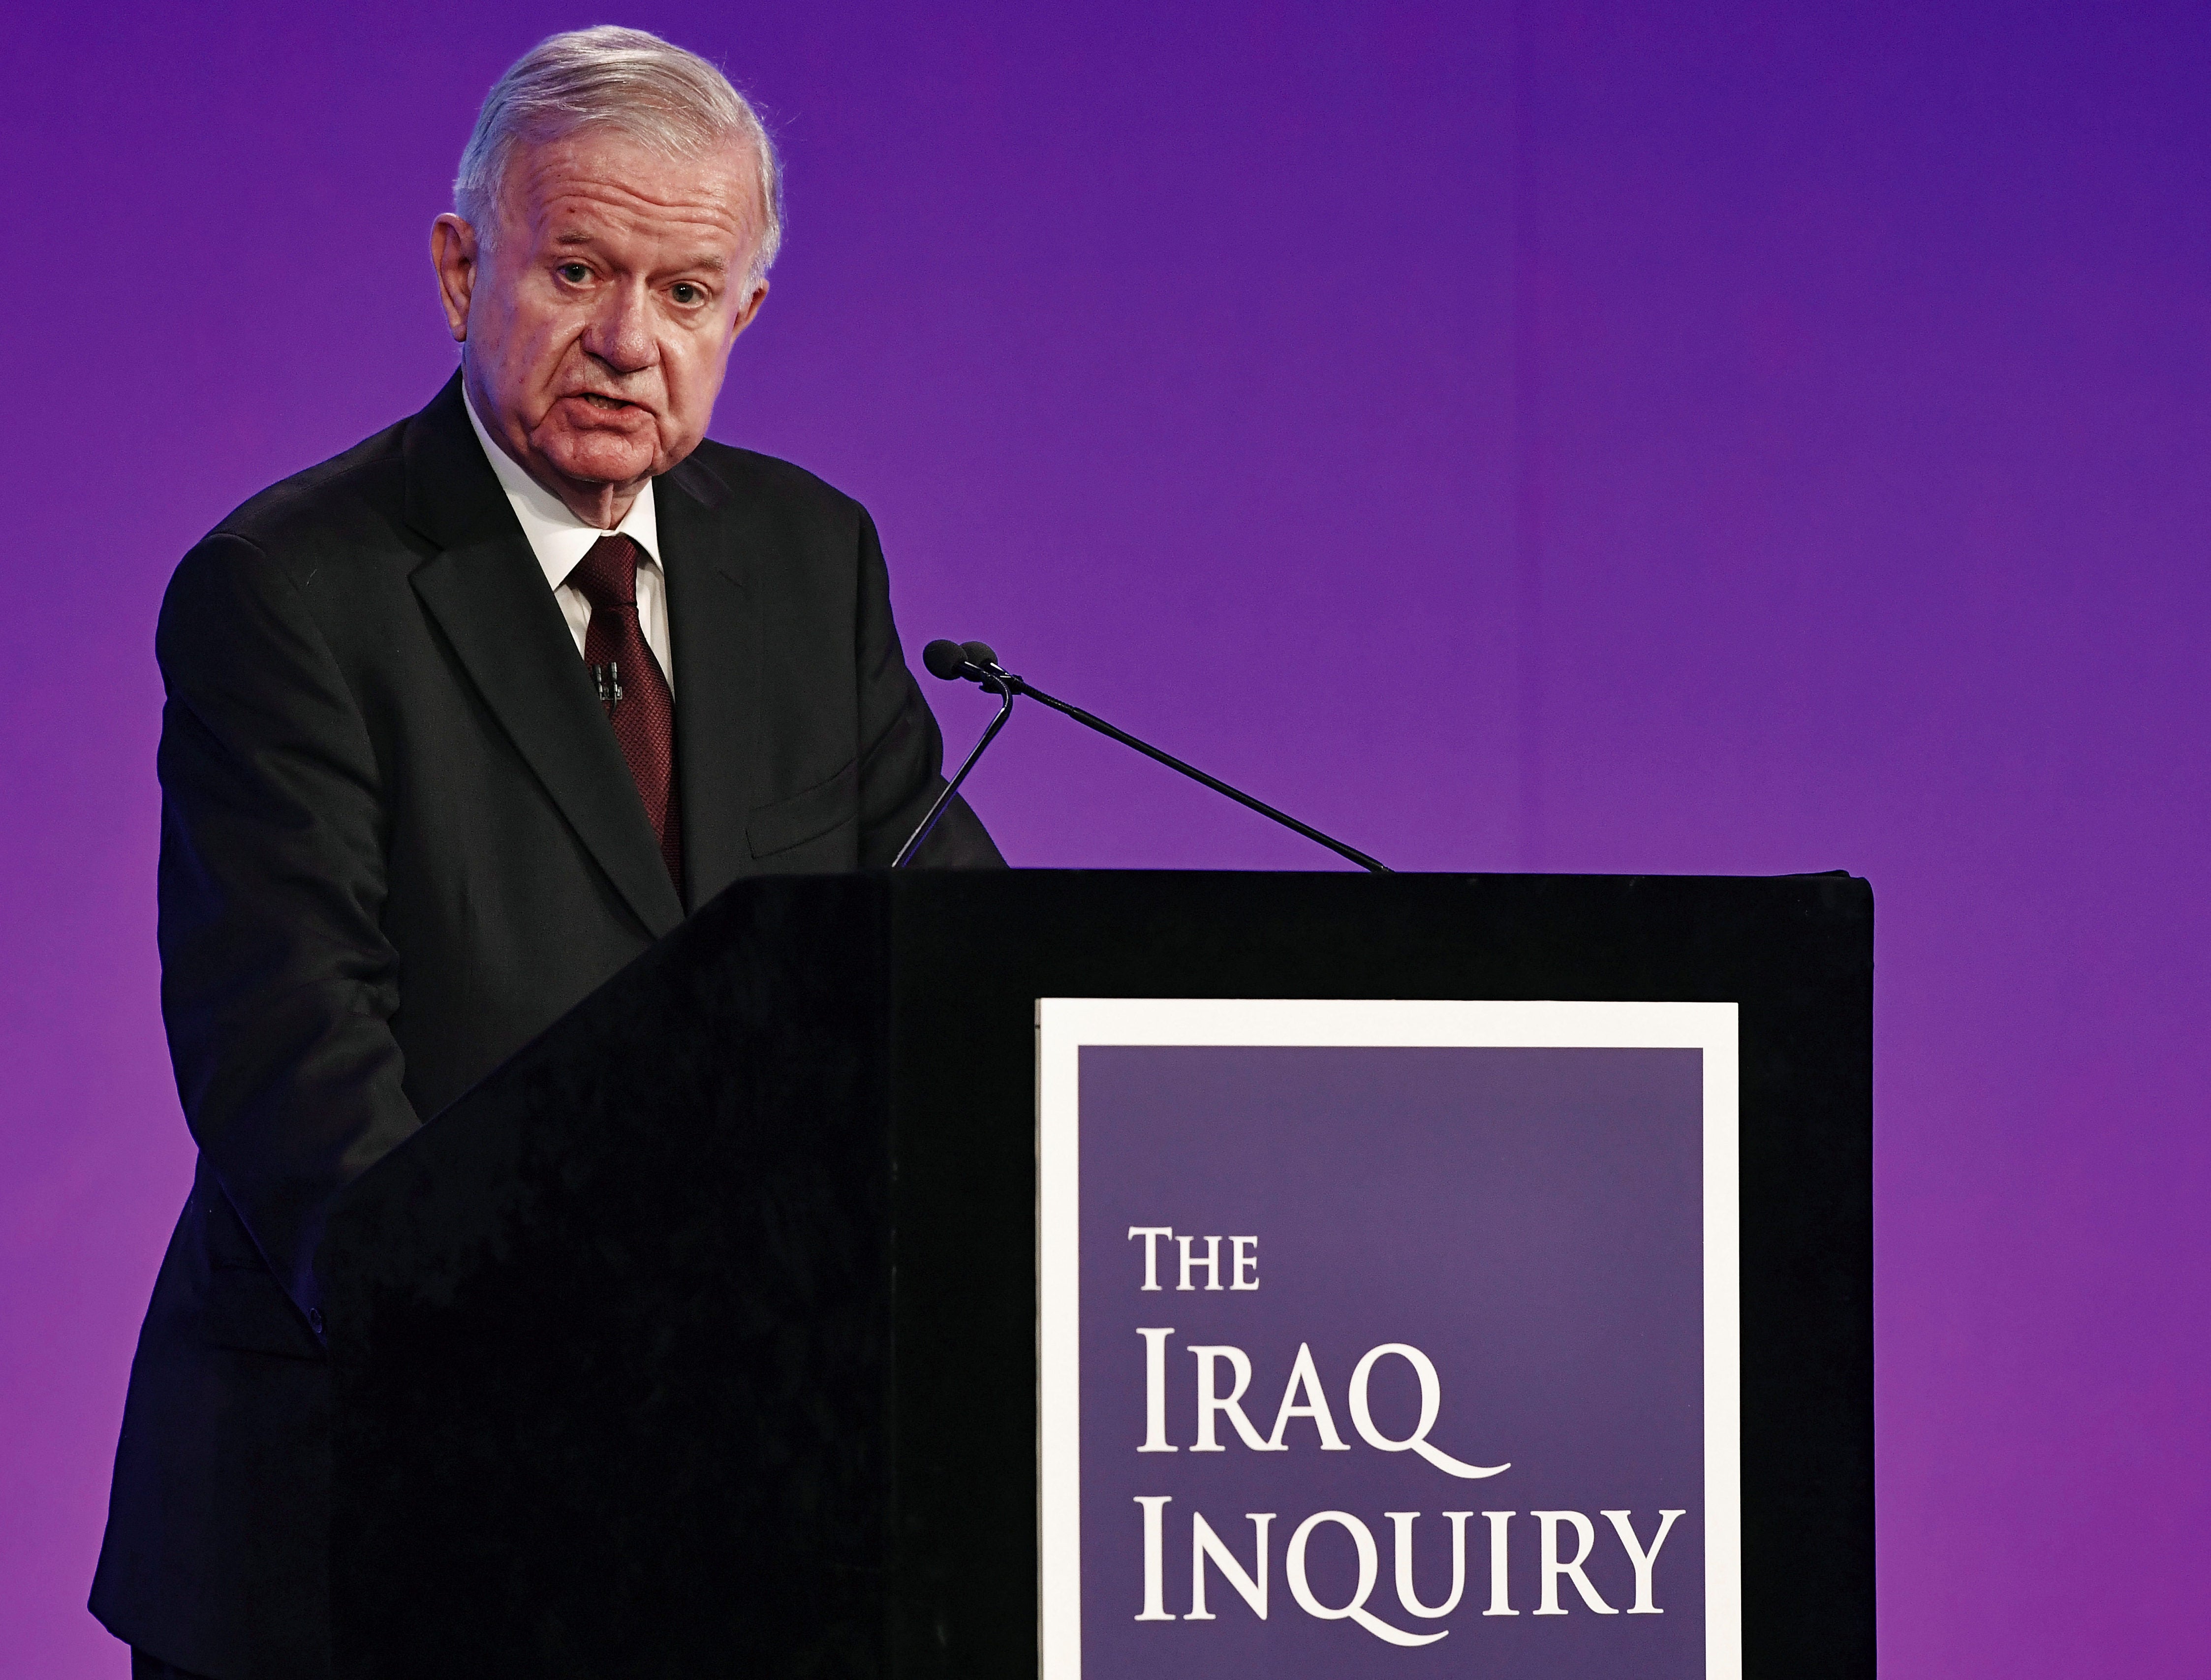 Chilcot report: Journalists and newspaper owners must also reflect on part they played in the march to war